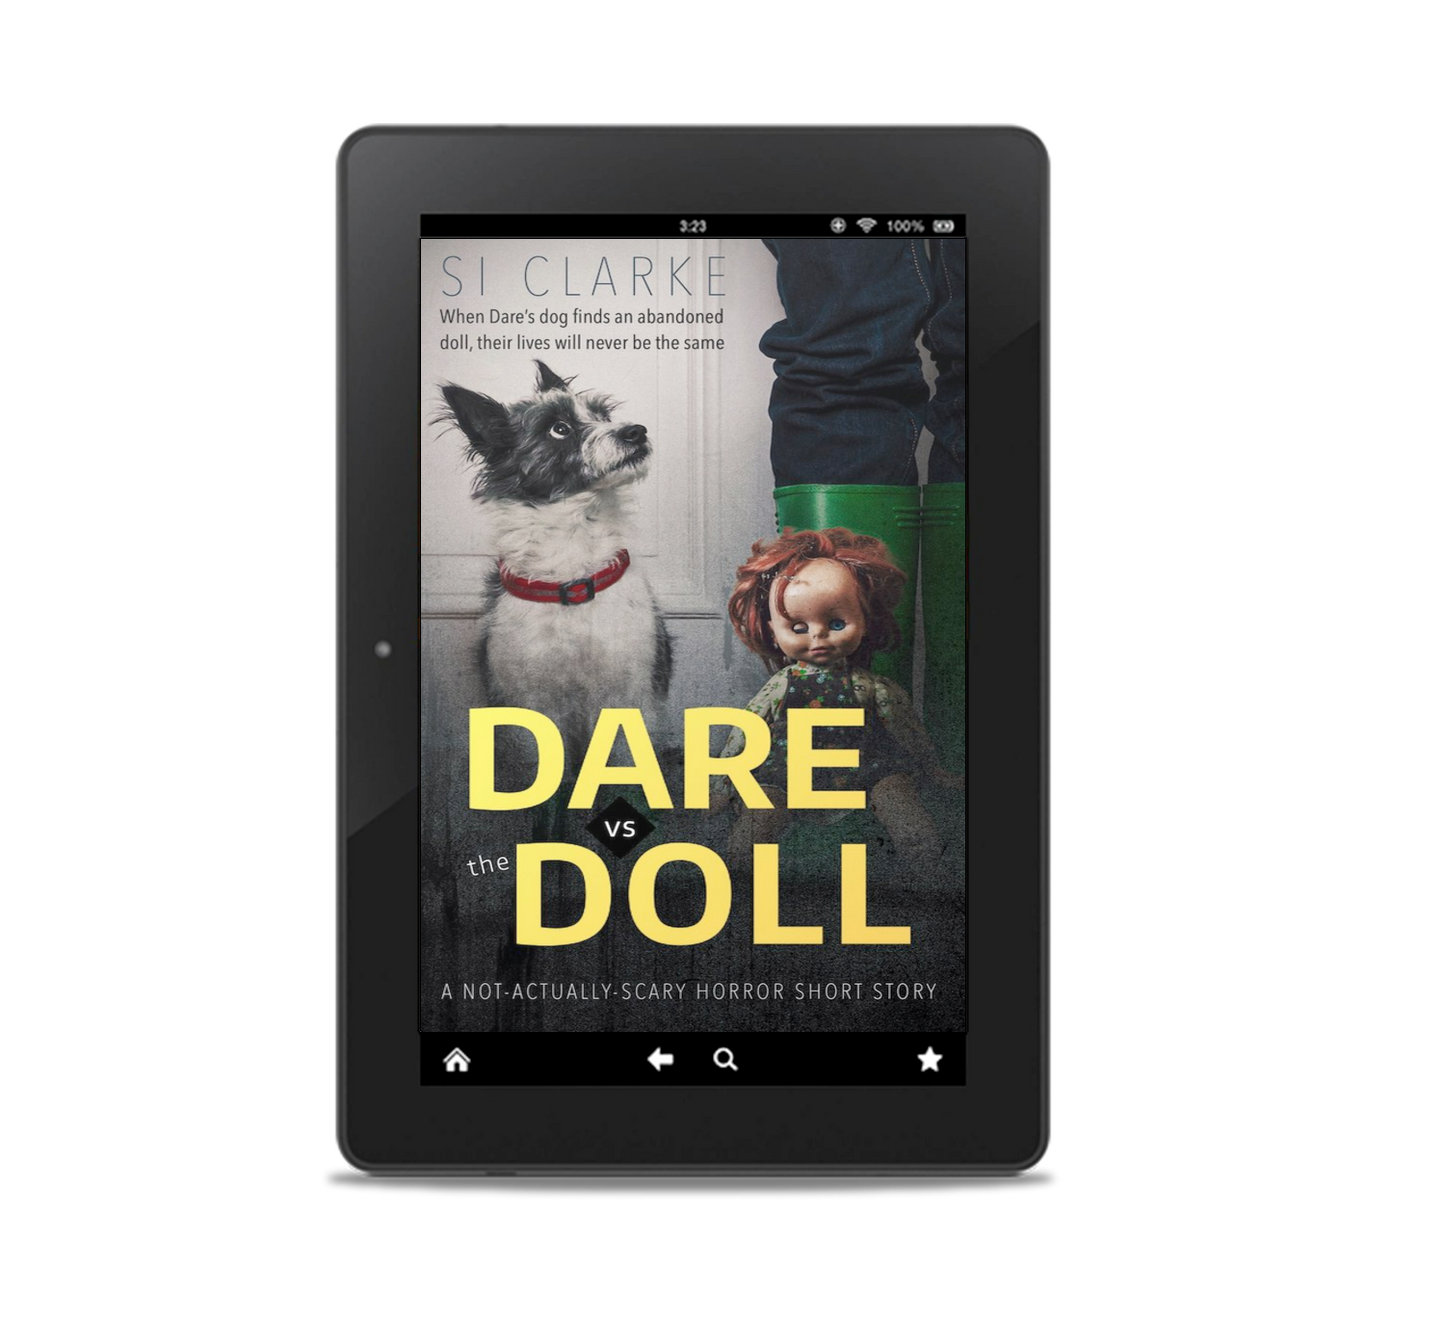 Date vs the Doll (a queer cosy horror short) by Si Clarke – ebook